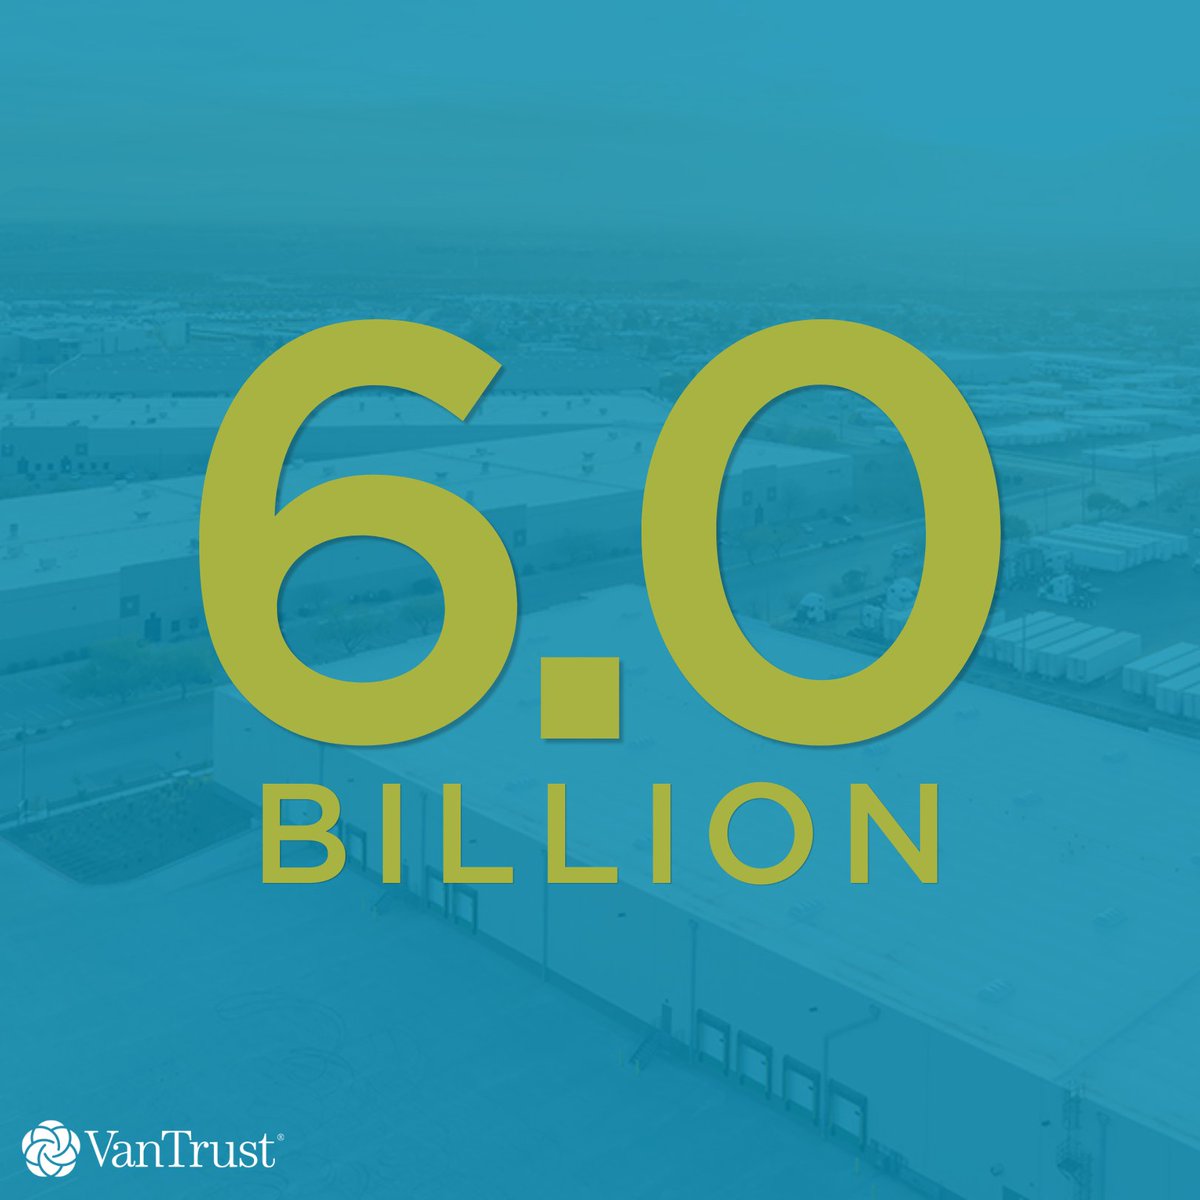 We’ve hit the $6B threshold in development/acquisitions since 2010! This is thanks to our brokers, lenders, contractors, customers, clients, community partners, team members, & others who have contributed to our collective success model. #MilestoneMonday #collectivesuccess #vtre